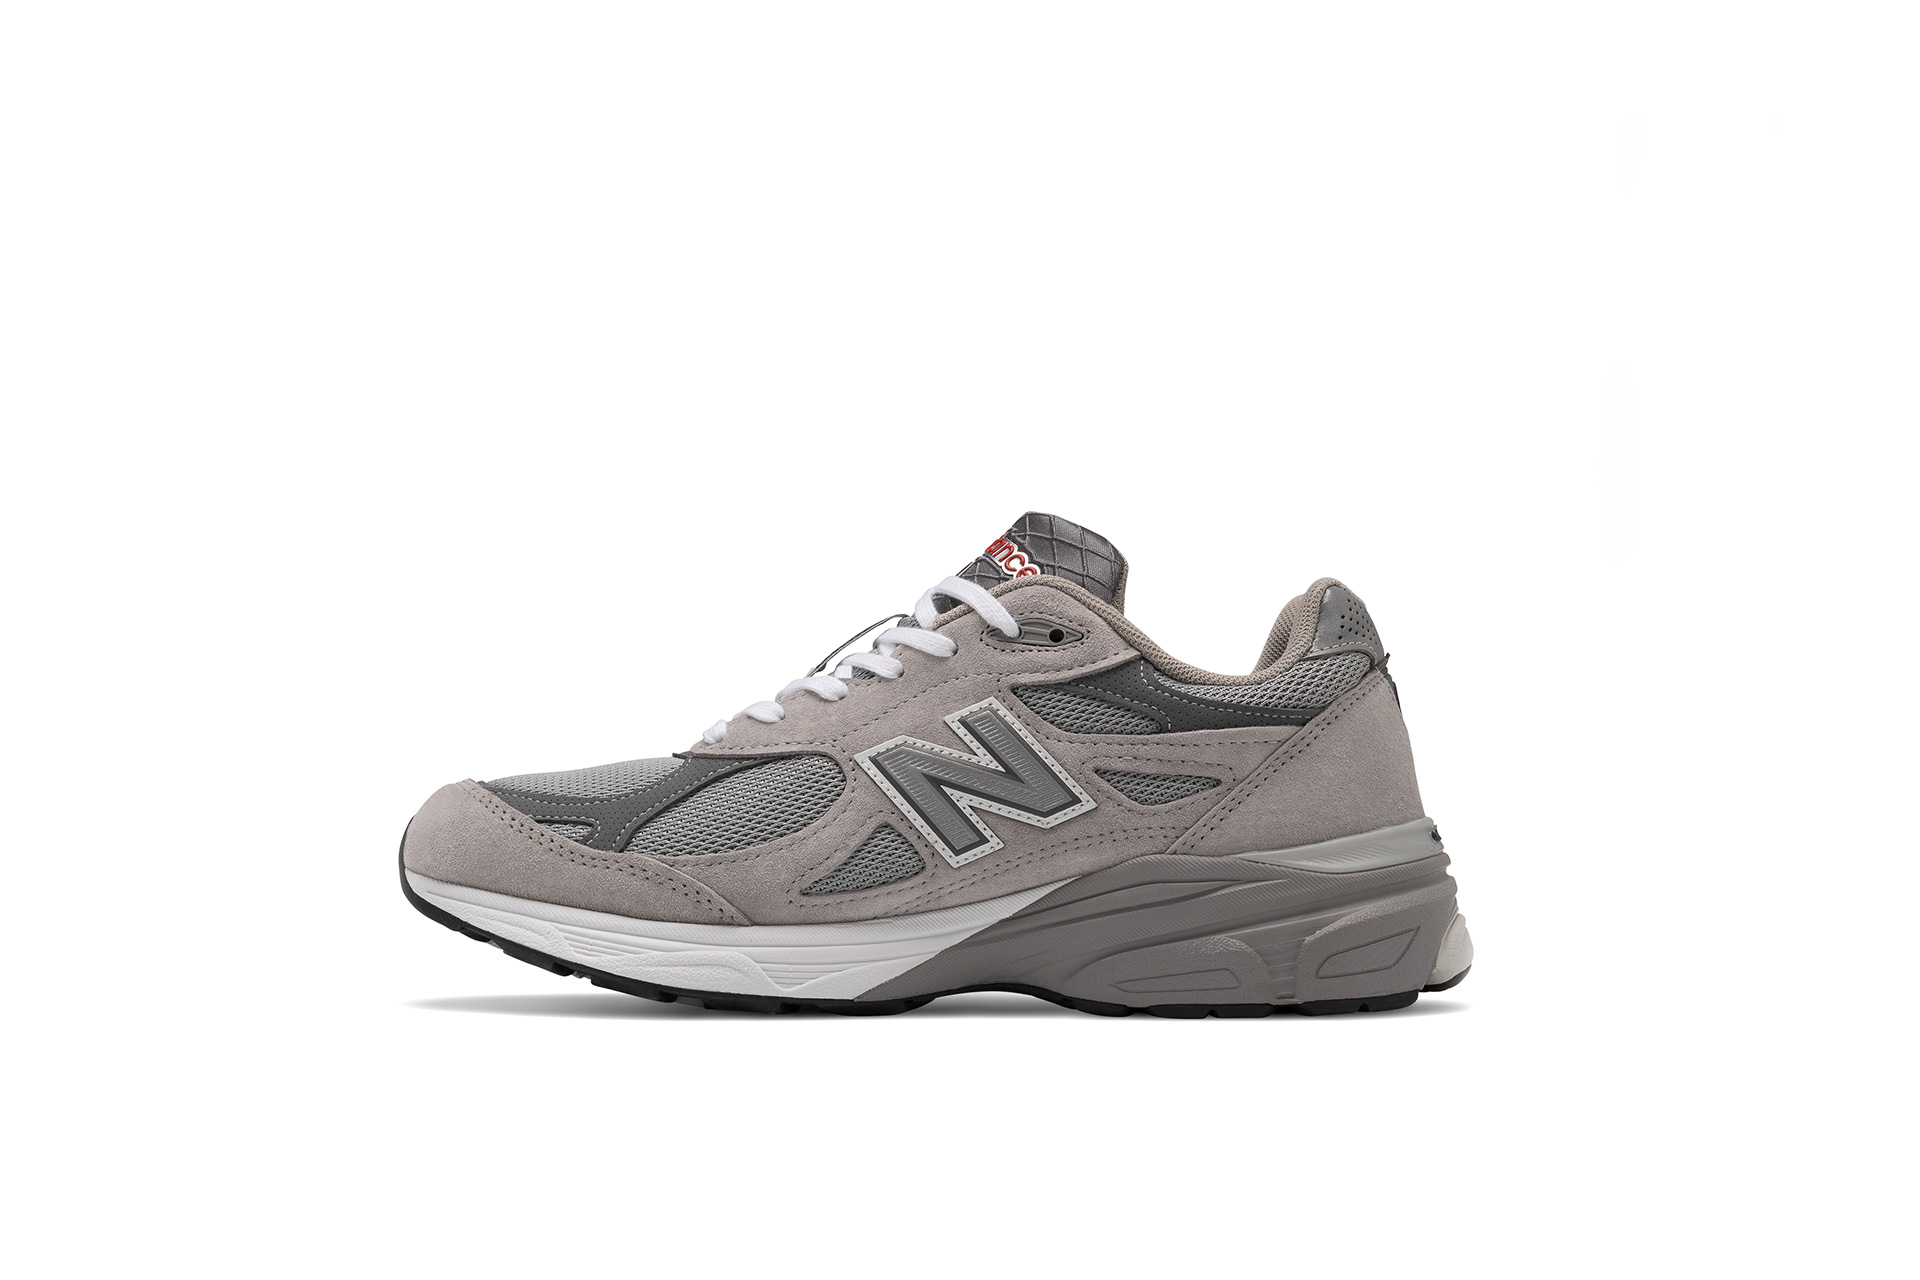 New Balance 990 V3 - M990GY3 - Grey - Footshop - Releases